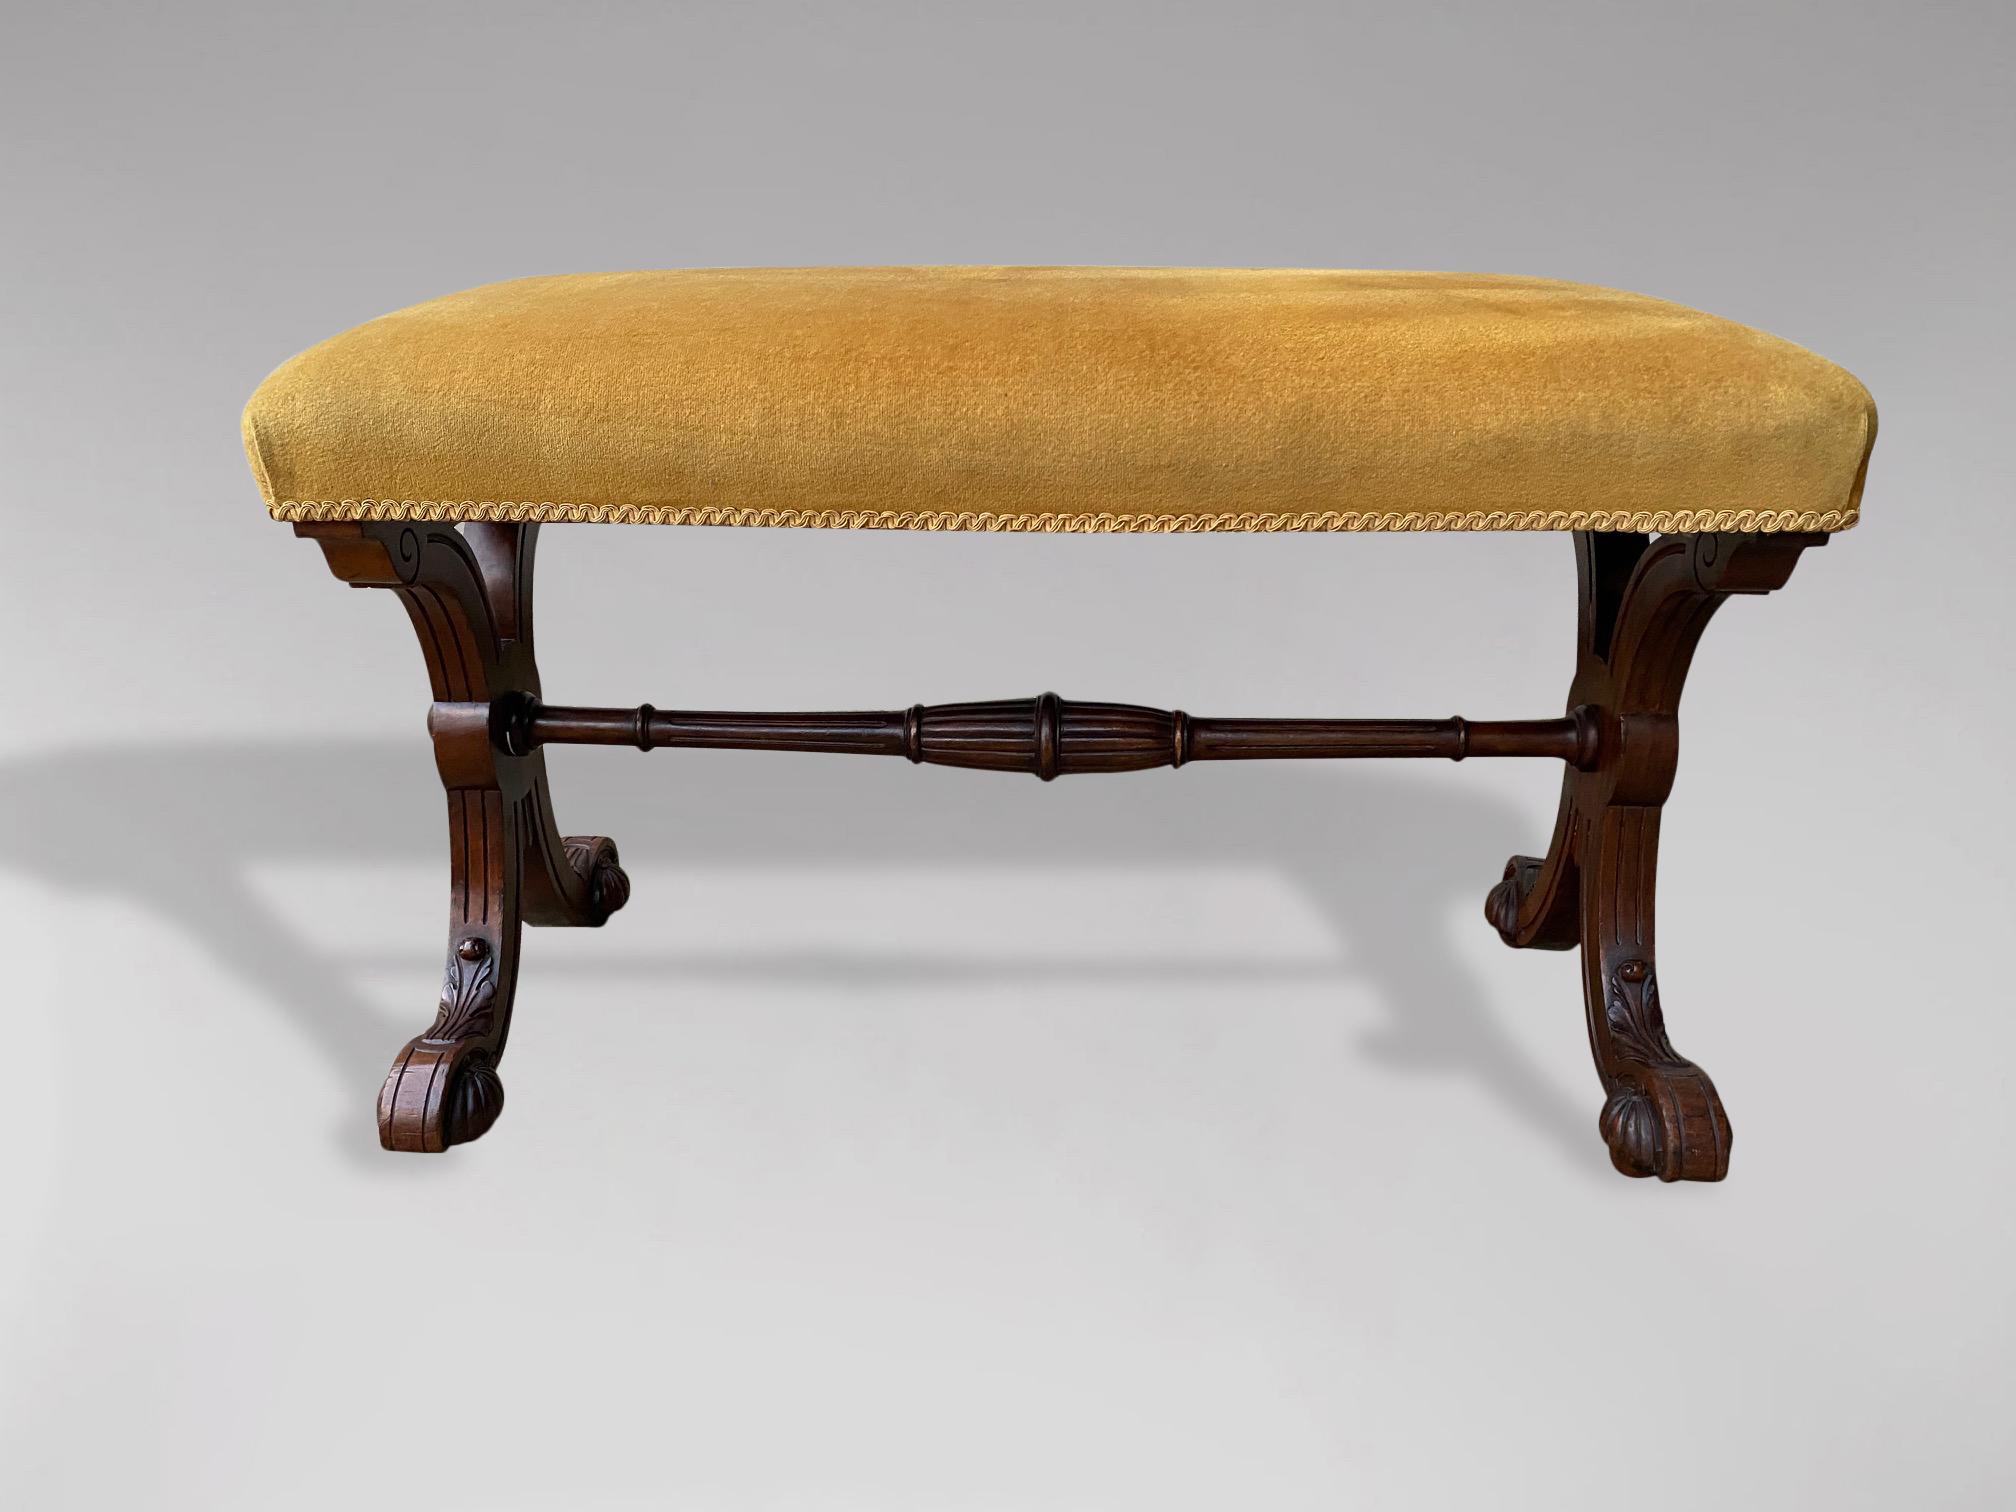 An exceptional 19th century, William IV period, mahogany X framed upholstered stool. Stuff over seat on scrolling cross supports, united with a turned stretcher, terminating on scrolled reeded bun feet with castors.

The dimensions are:
Height: 52cm